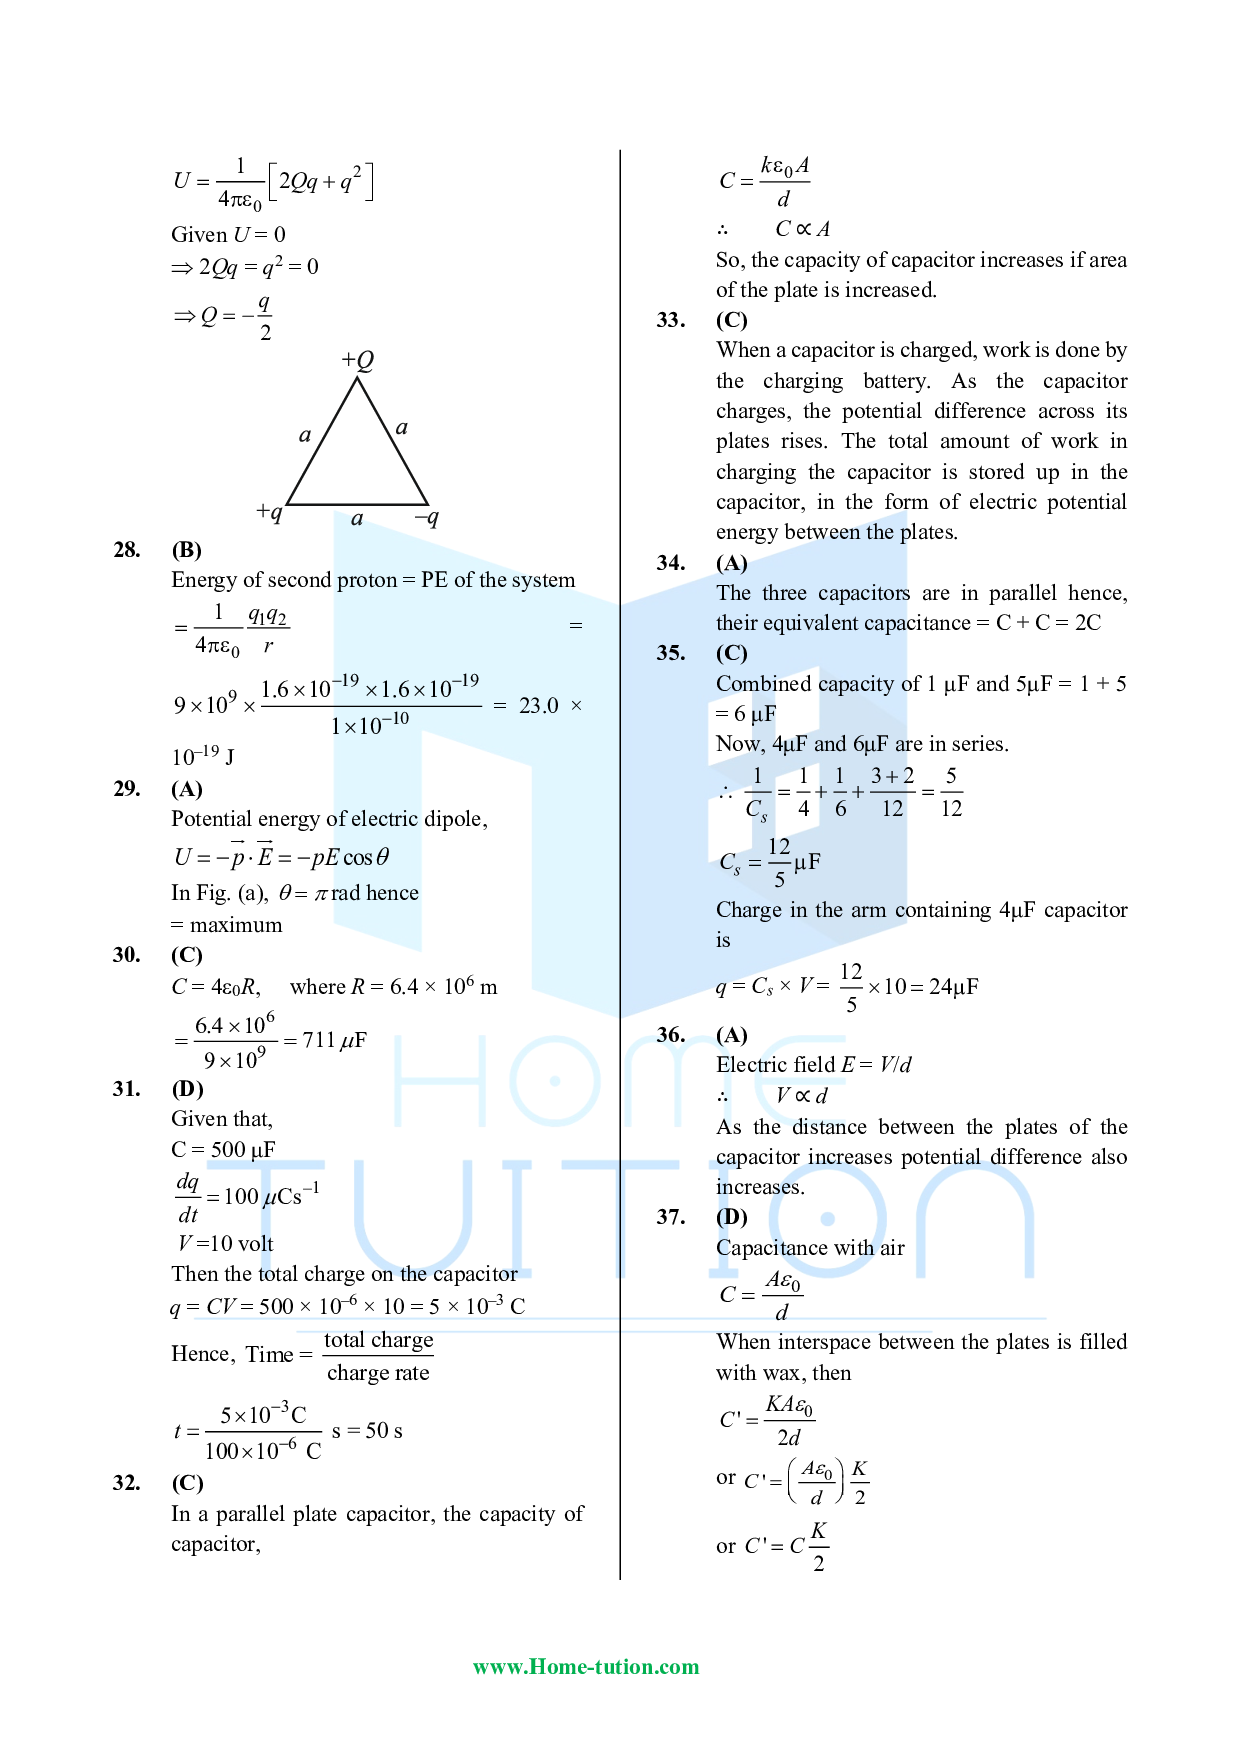 CUET MCQ Questions For Physics Chapter-02 Electrostatic Potential and Capacitance